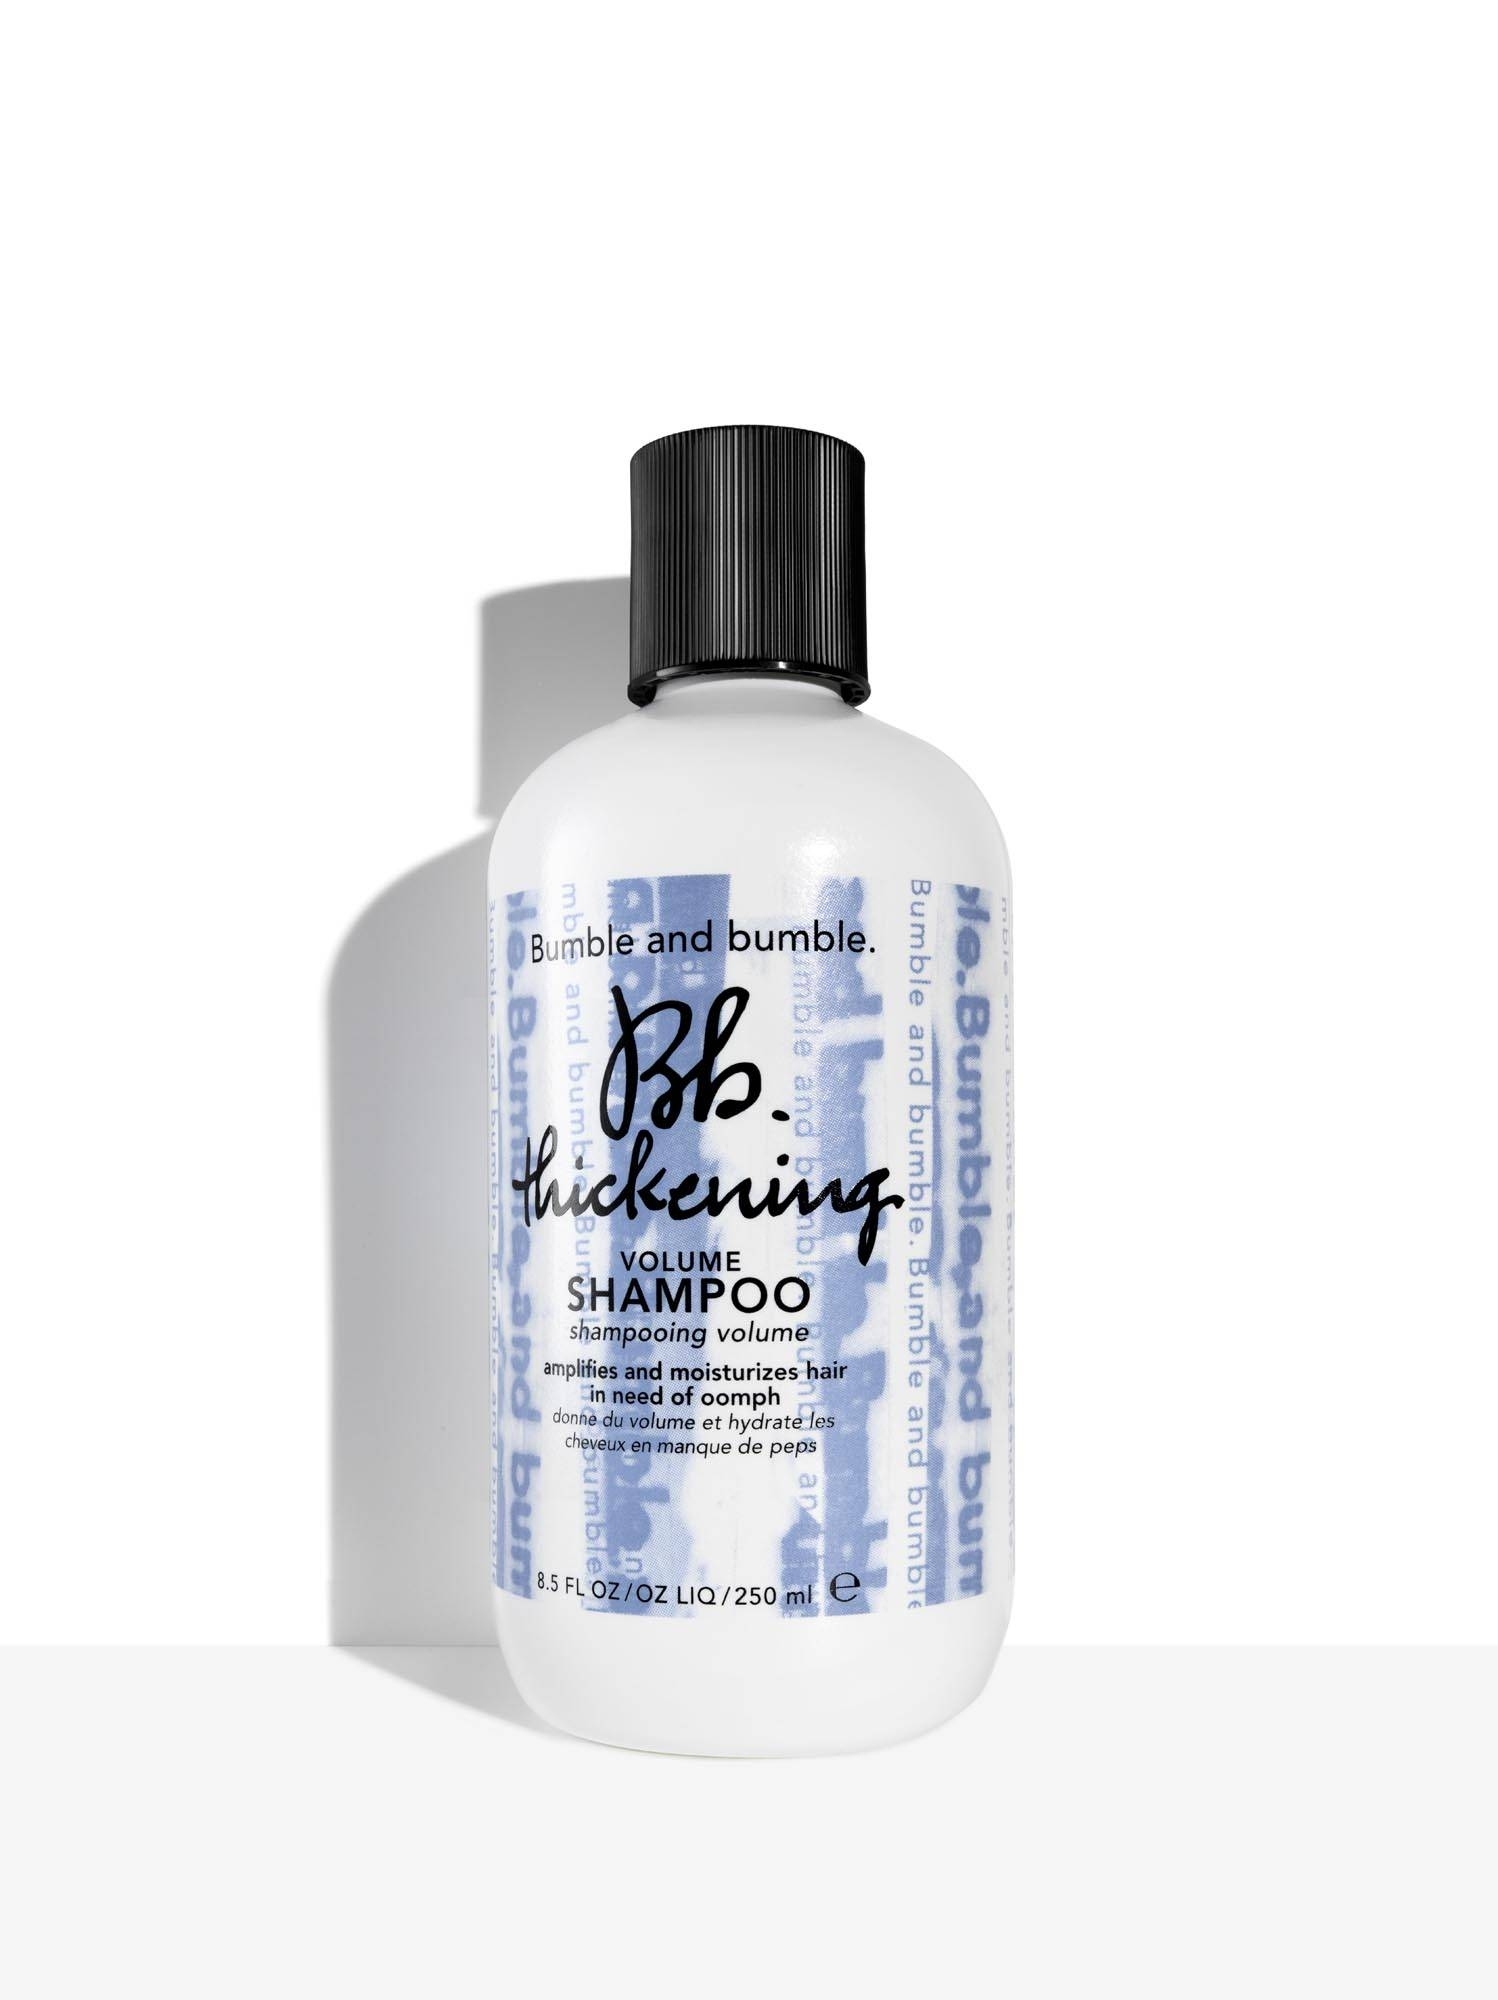 Bumble and bumble Bb. Thickening Volume Shampoo 